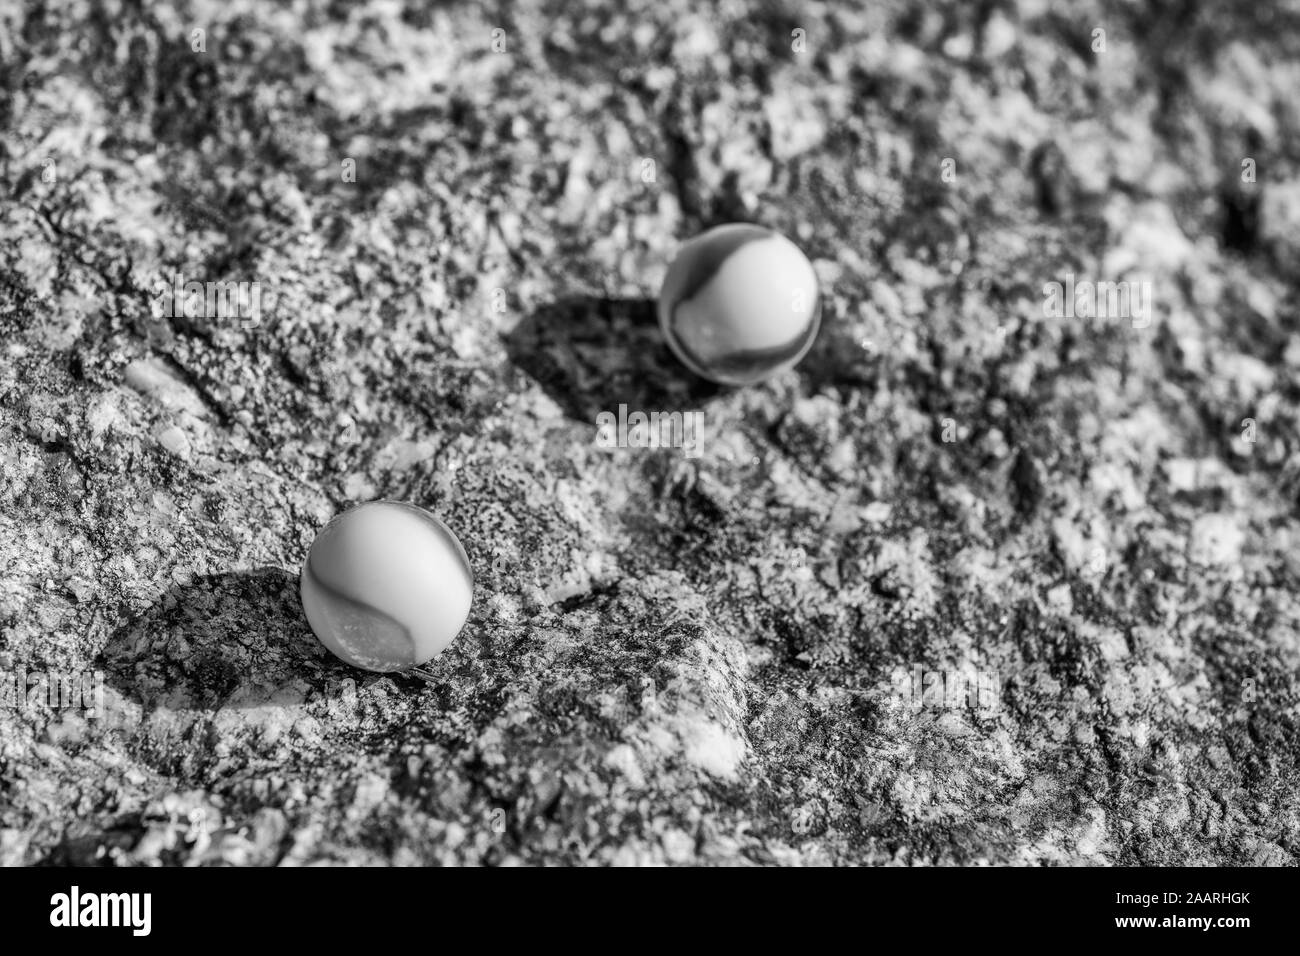 Black & white glass marbles on rough stone surface. For something lost, mental health, losing your marbles, abstract spheres, dreams, Biden & marbles. Stock Photo